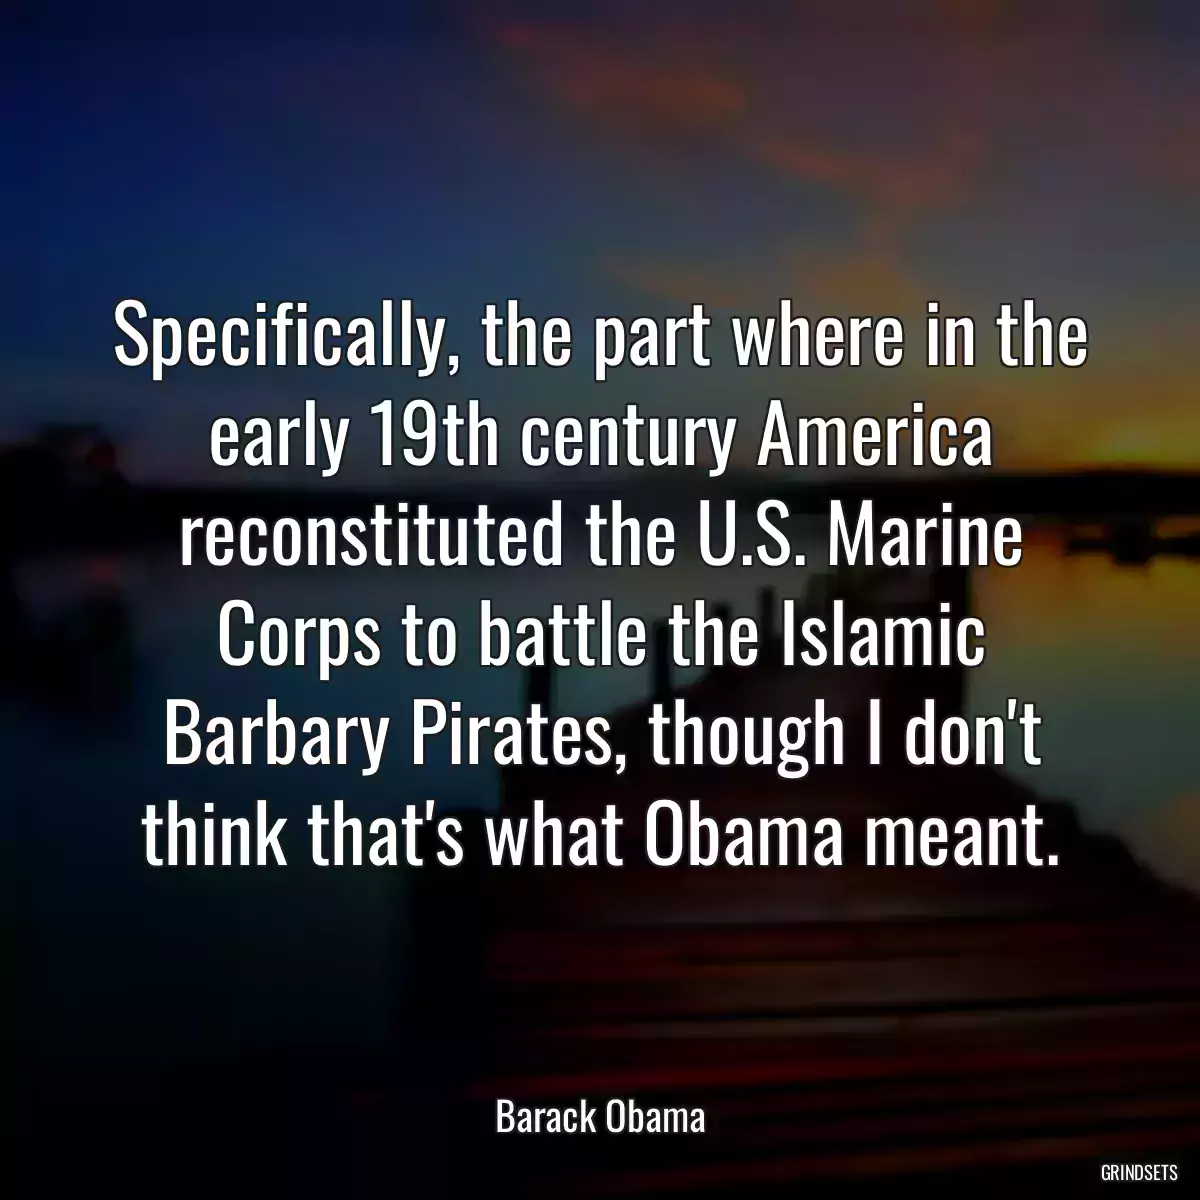 Specifically, the part where in the early 19th century America reconstituted the U.S. Marine Corps to battle the Islamic Barbary Pirates, though I don\'t think that\'s what Obama meant.